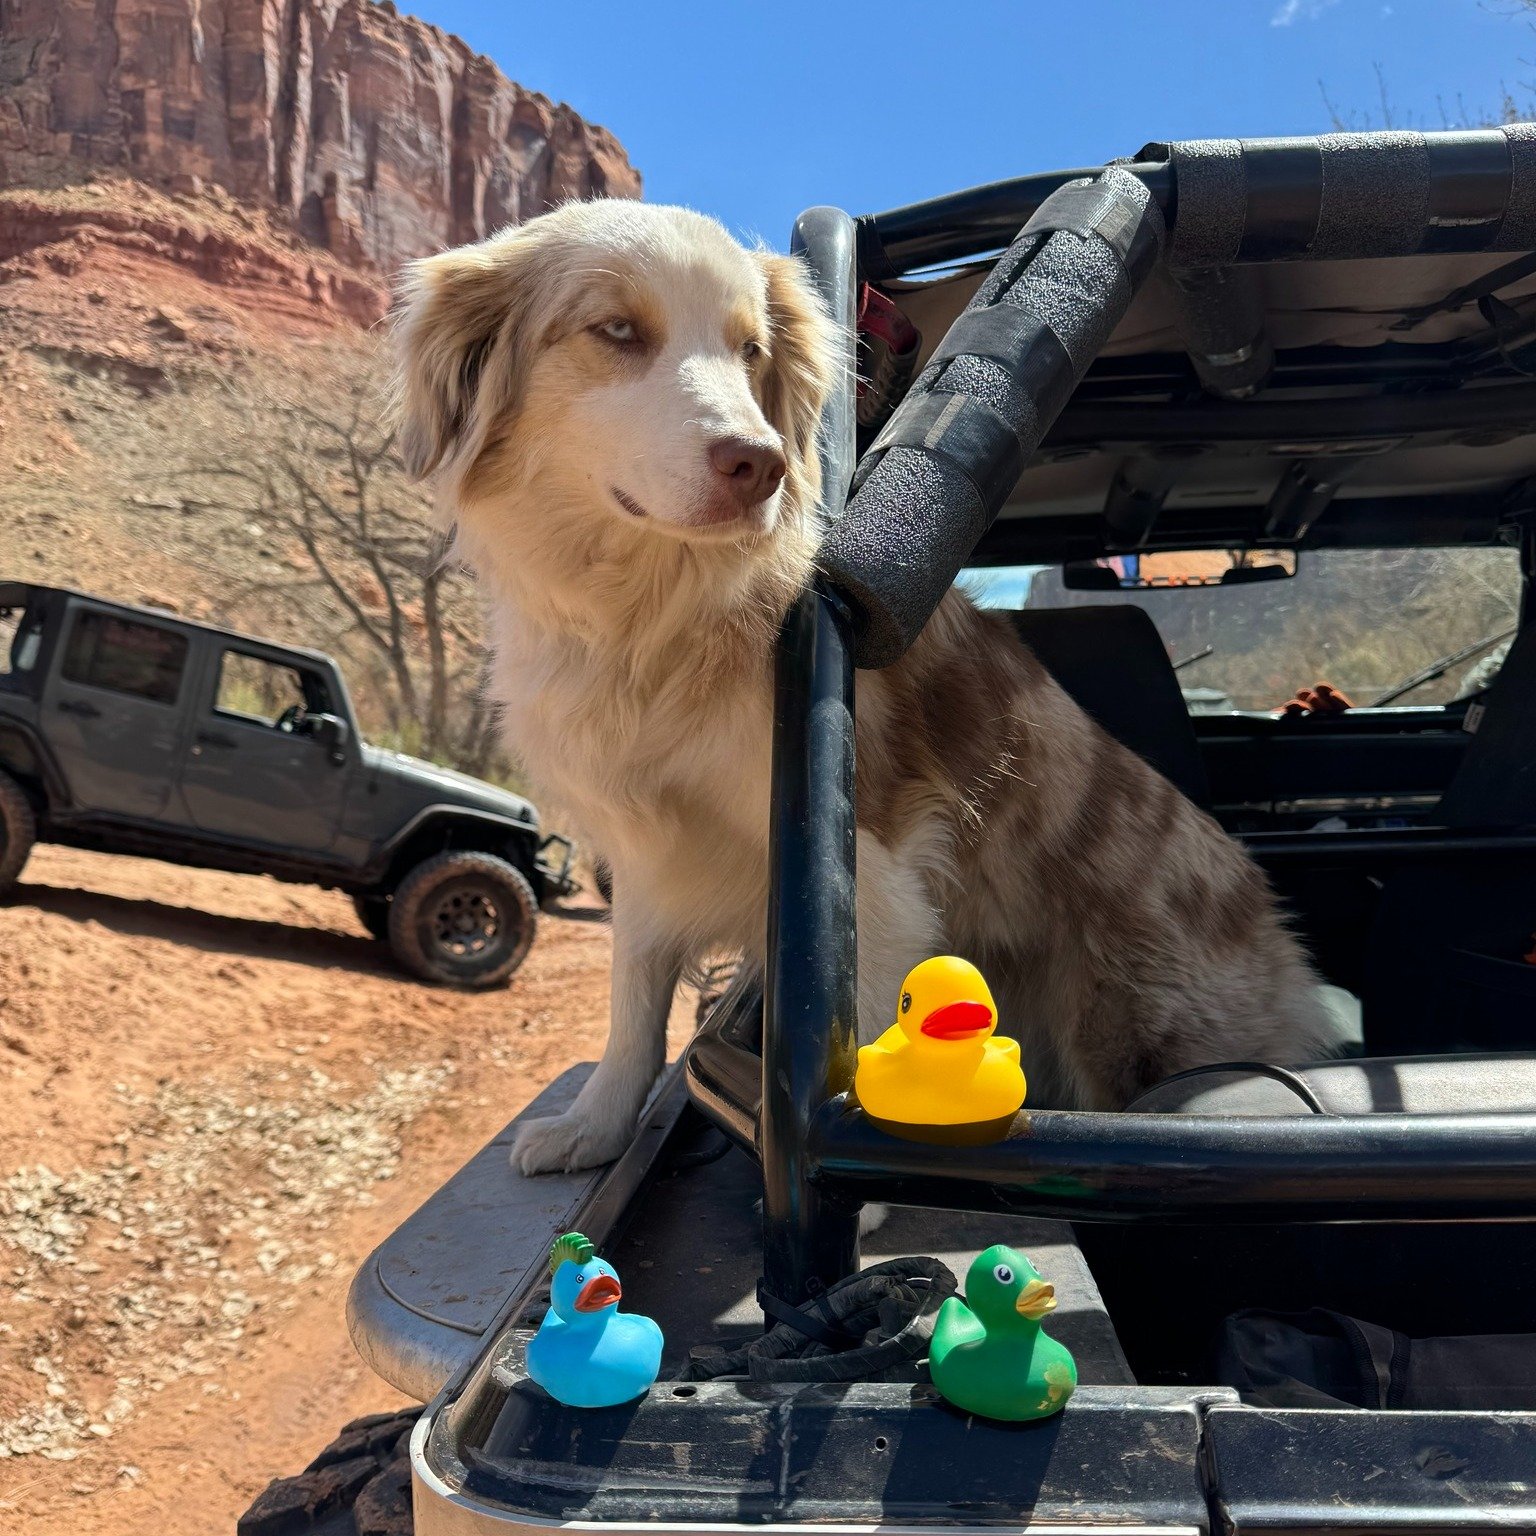 All through April, Richie&rsquo;s Diner Rancho Cucamonga is playing Duck! Duck! Jeep, both near and far!  Whether you are in the neighborhood or are on a Jeep Jamboree, tag us on social media when you post your Jeep/Duckie photos! You will be entered